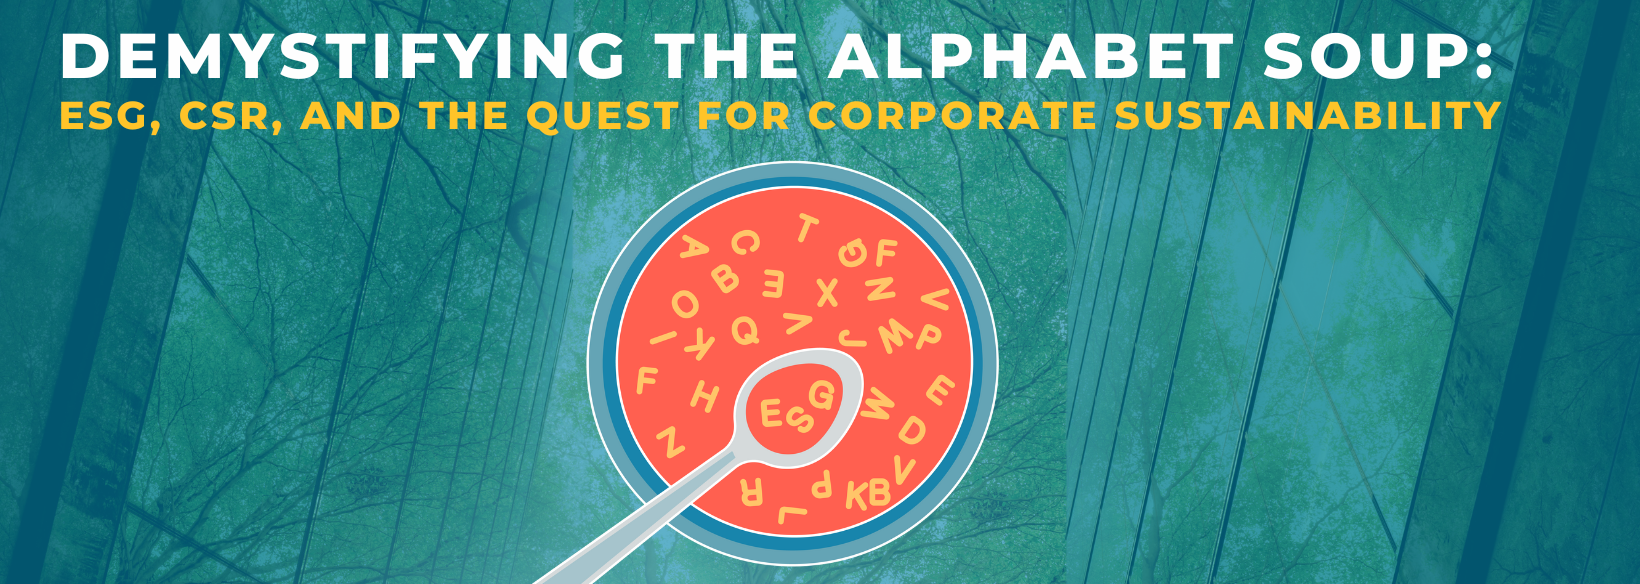 Demystifying the Alphabet Soup: ESG, CSR, and the Quest for Corporate Sustainability